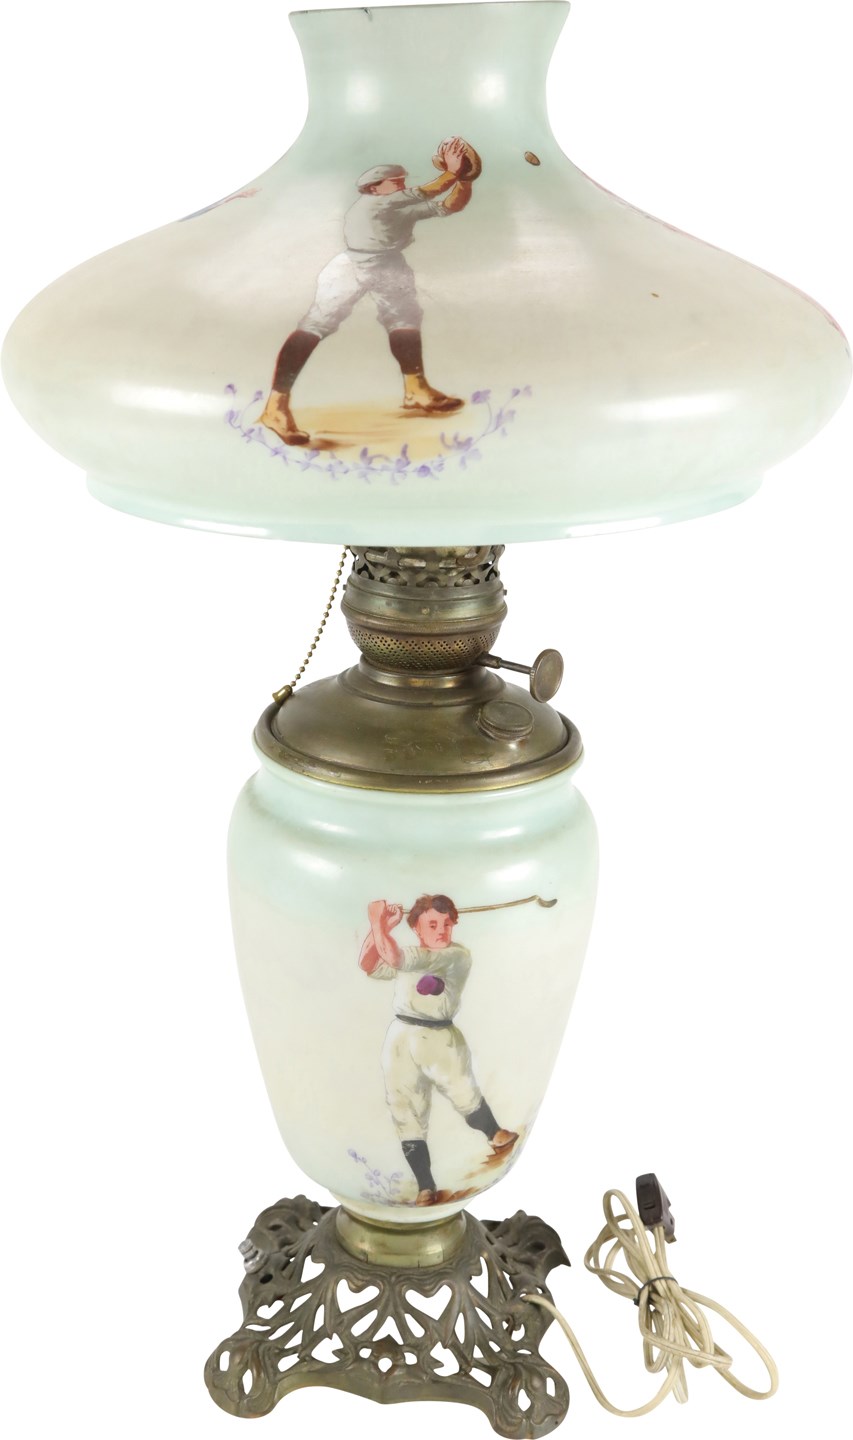 - Circa 1900 Decorative Hand-Painted Glass Lamp with Sports Motif